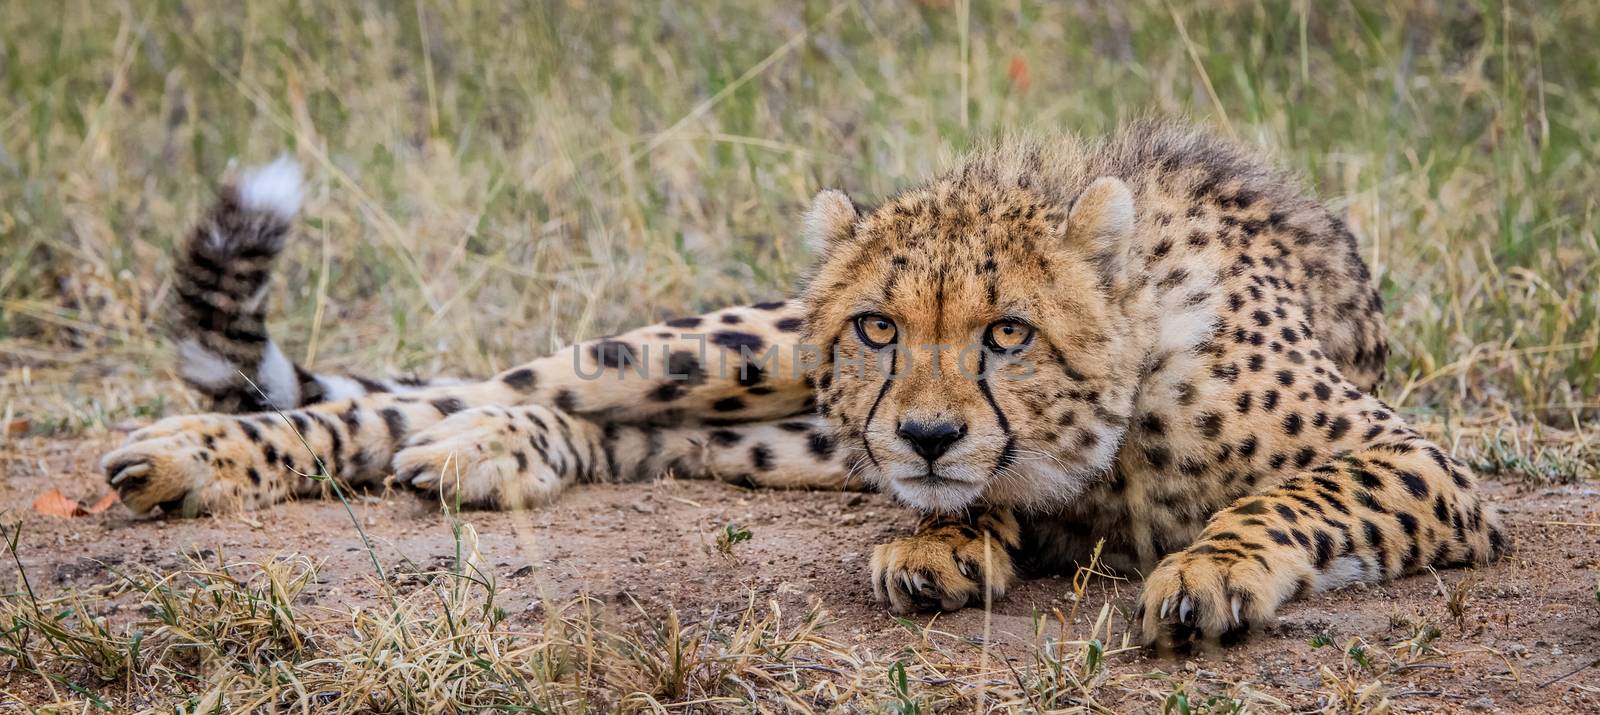 Laying Cheetah in the Selati Game Reserve by Simoneemanphotography